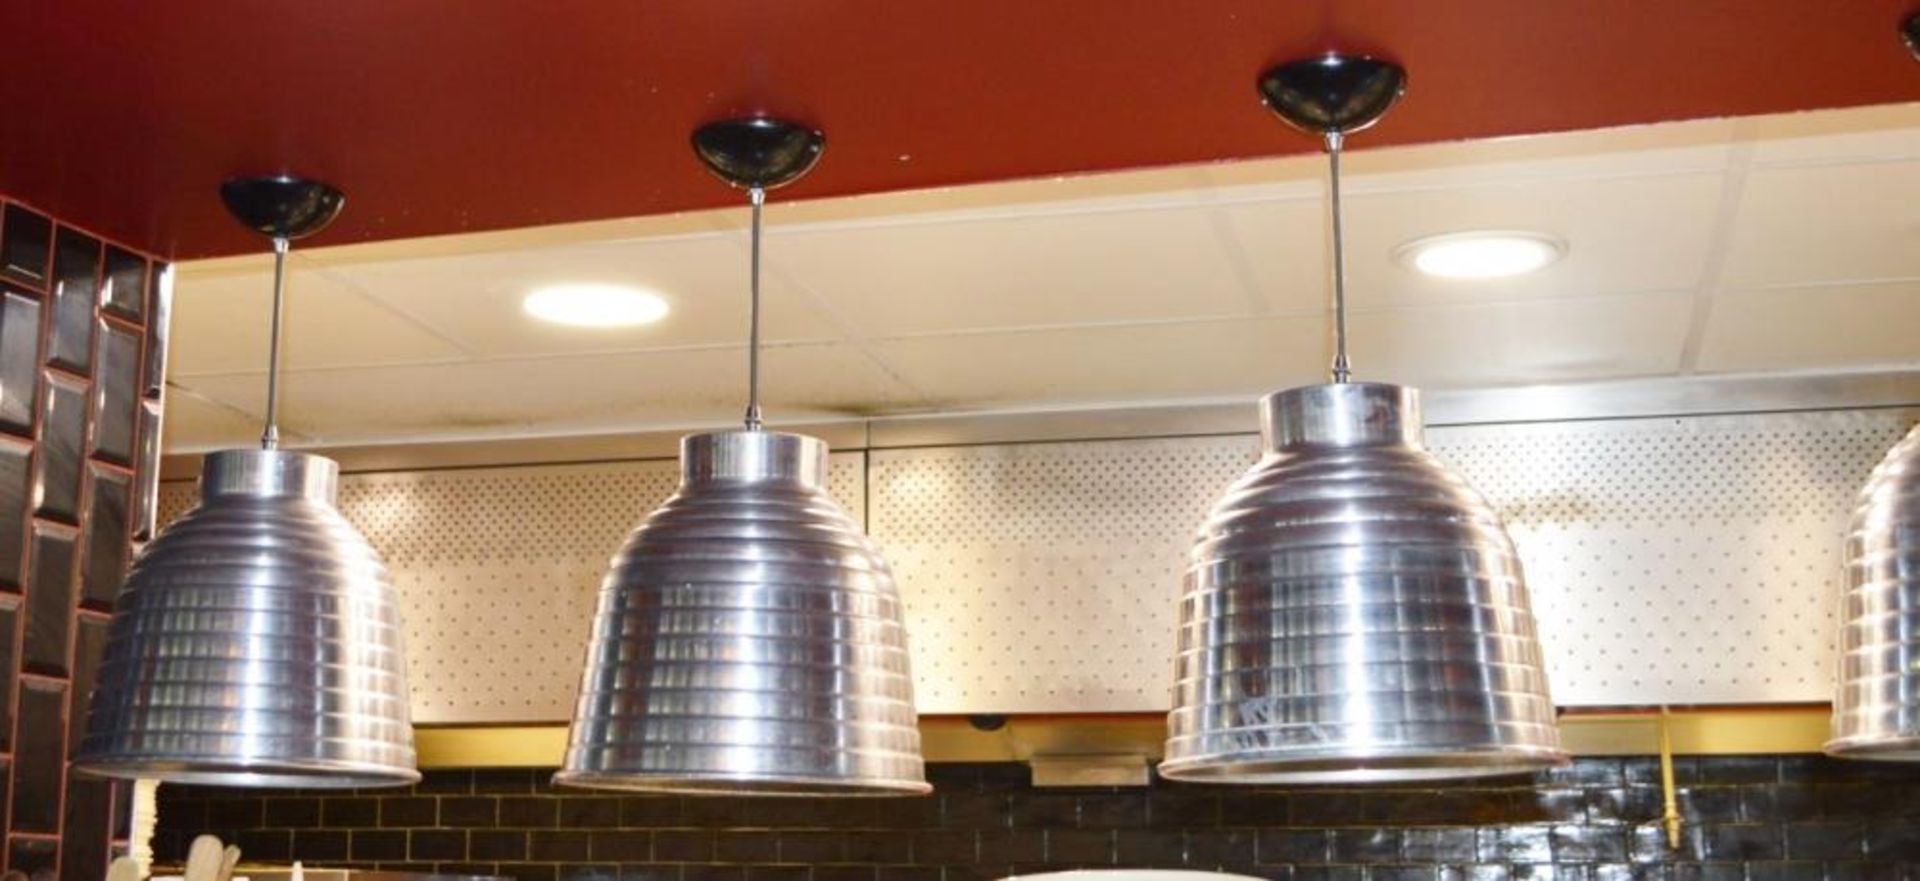 9 x Suspended Food Warming Lamps With Ribbed Chrome Design - CL390 - Location: Sheffield S9 This lot - Image 4 of 6